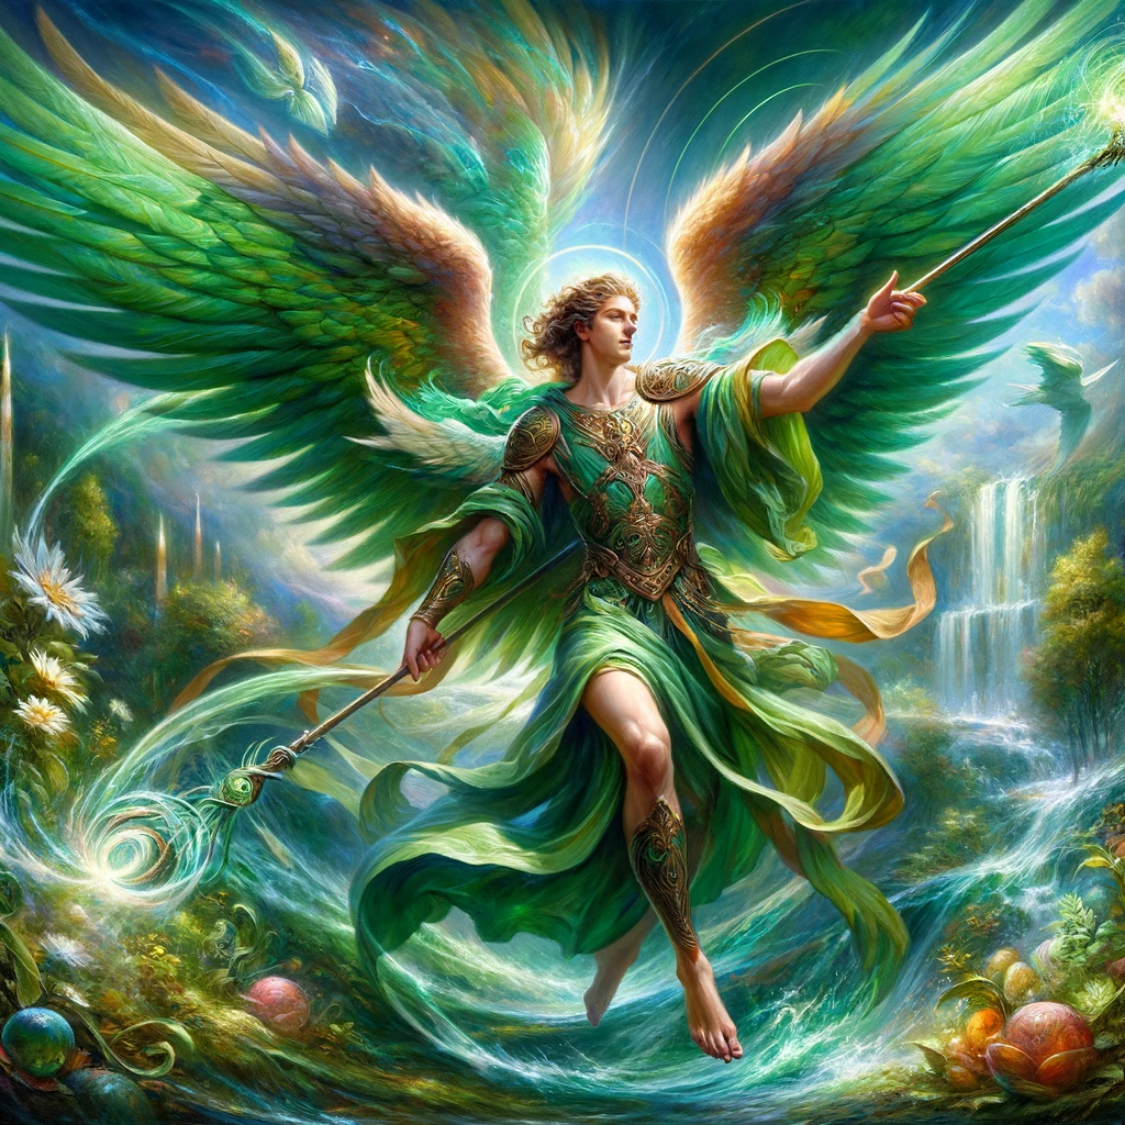 Embrace Healing and Restoration with Archangel Raphael, a Canvas of Light